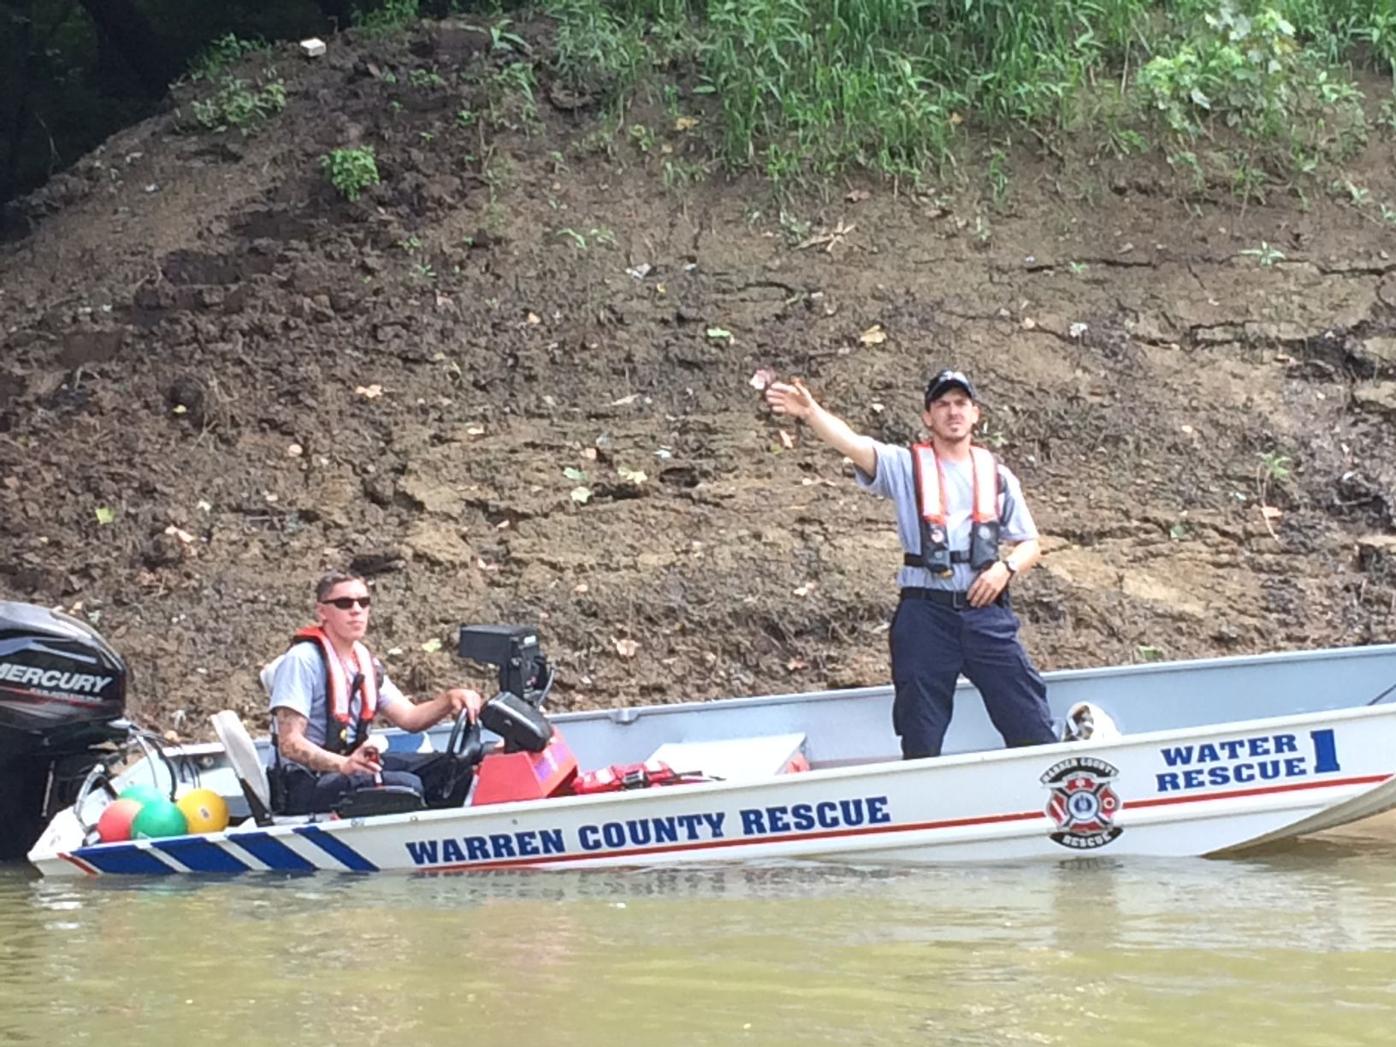 Search continues for drowning victim